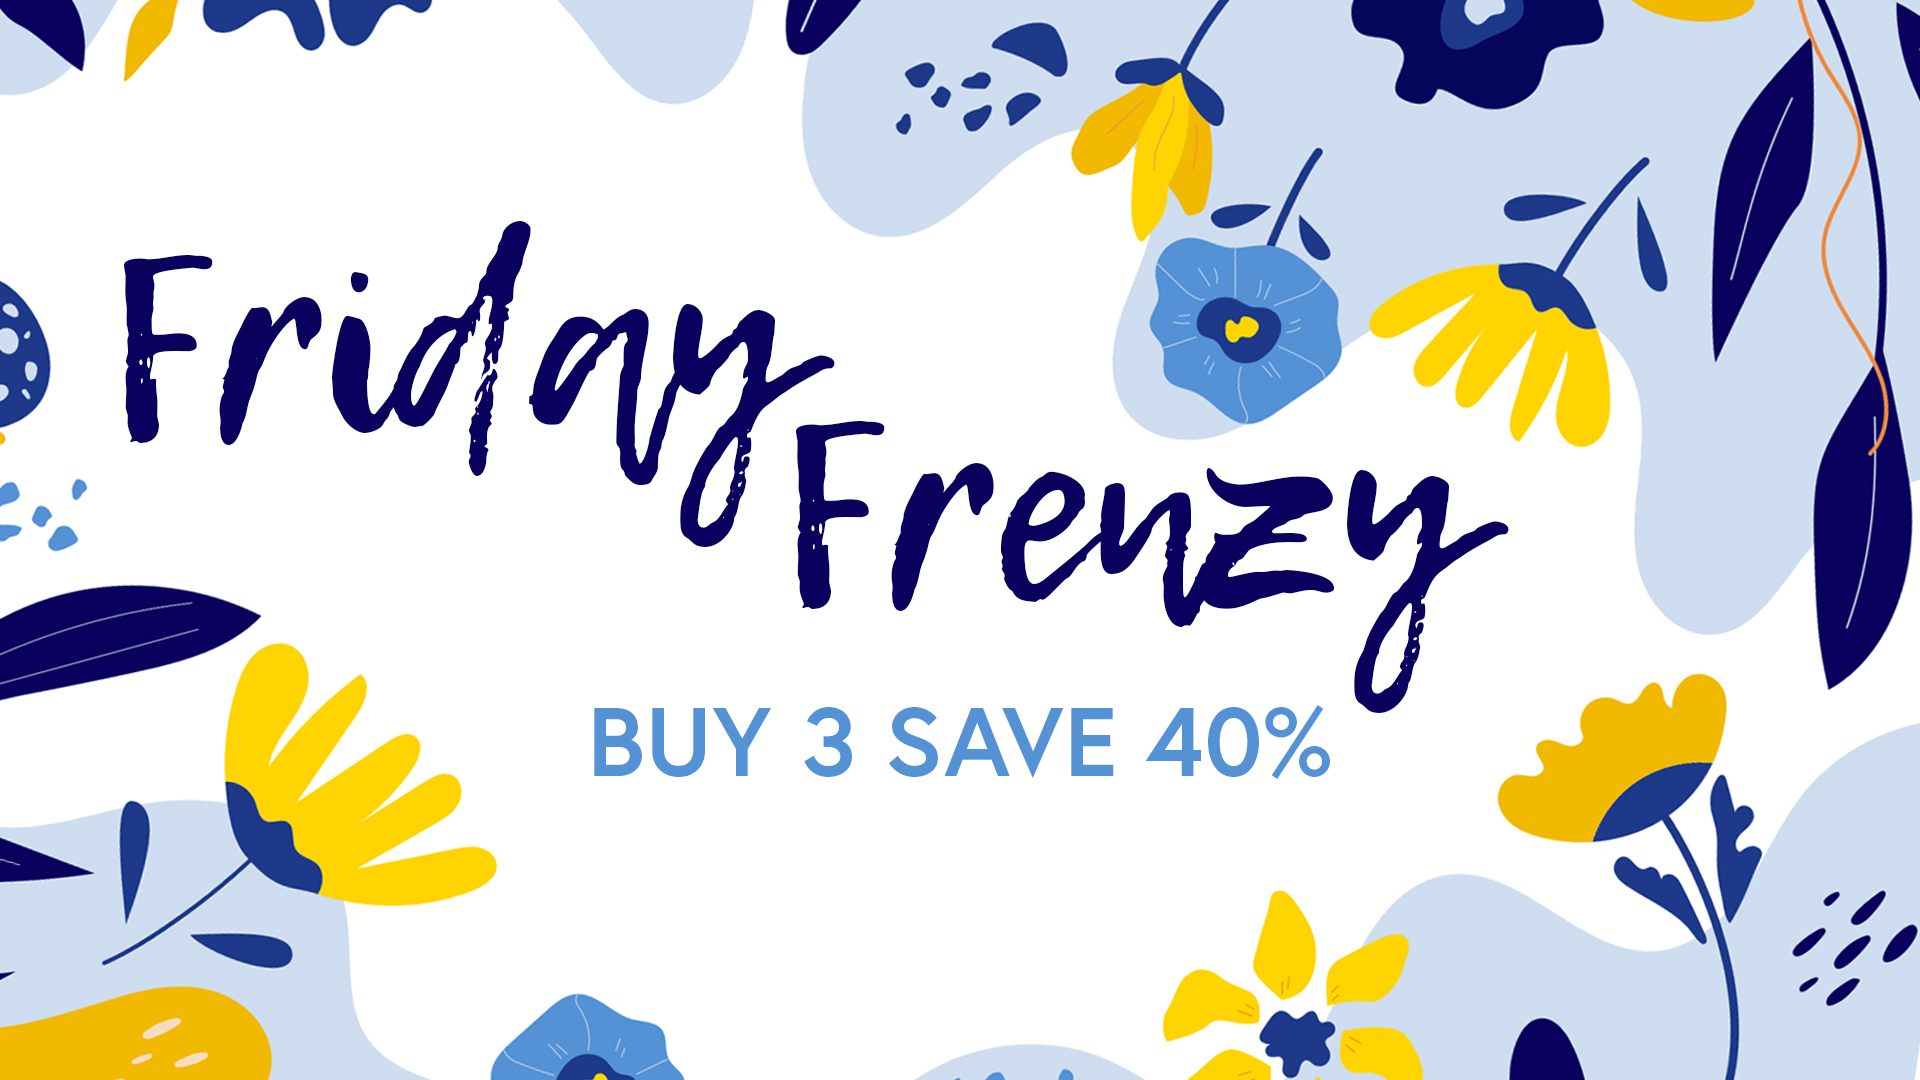 catch-up-with-the-friday-frenzy---buy-3-save-40-on-selected-thirsty-brush-products-22nd-oct-21